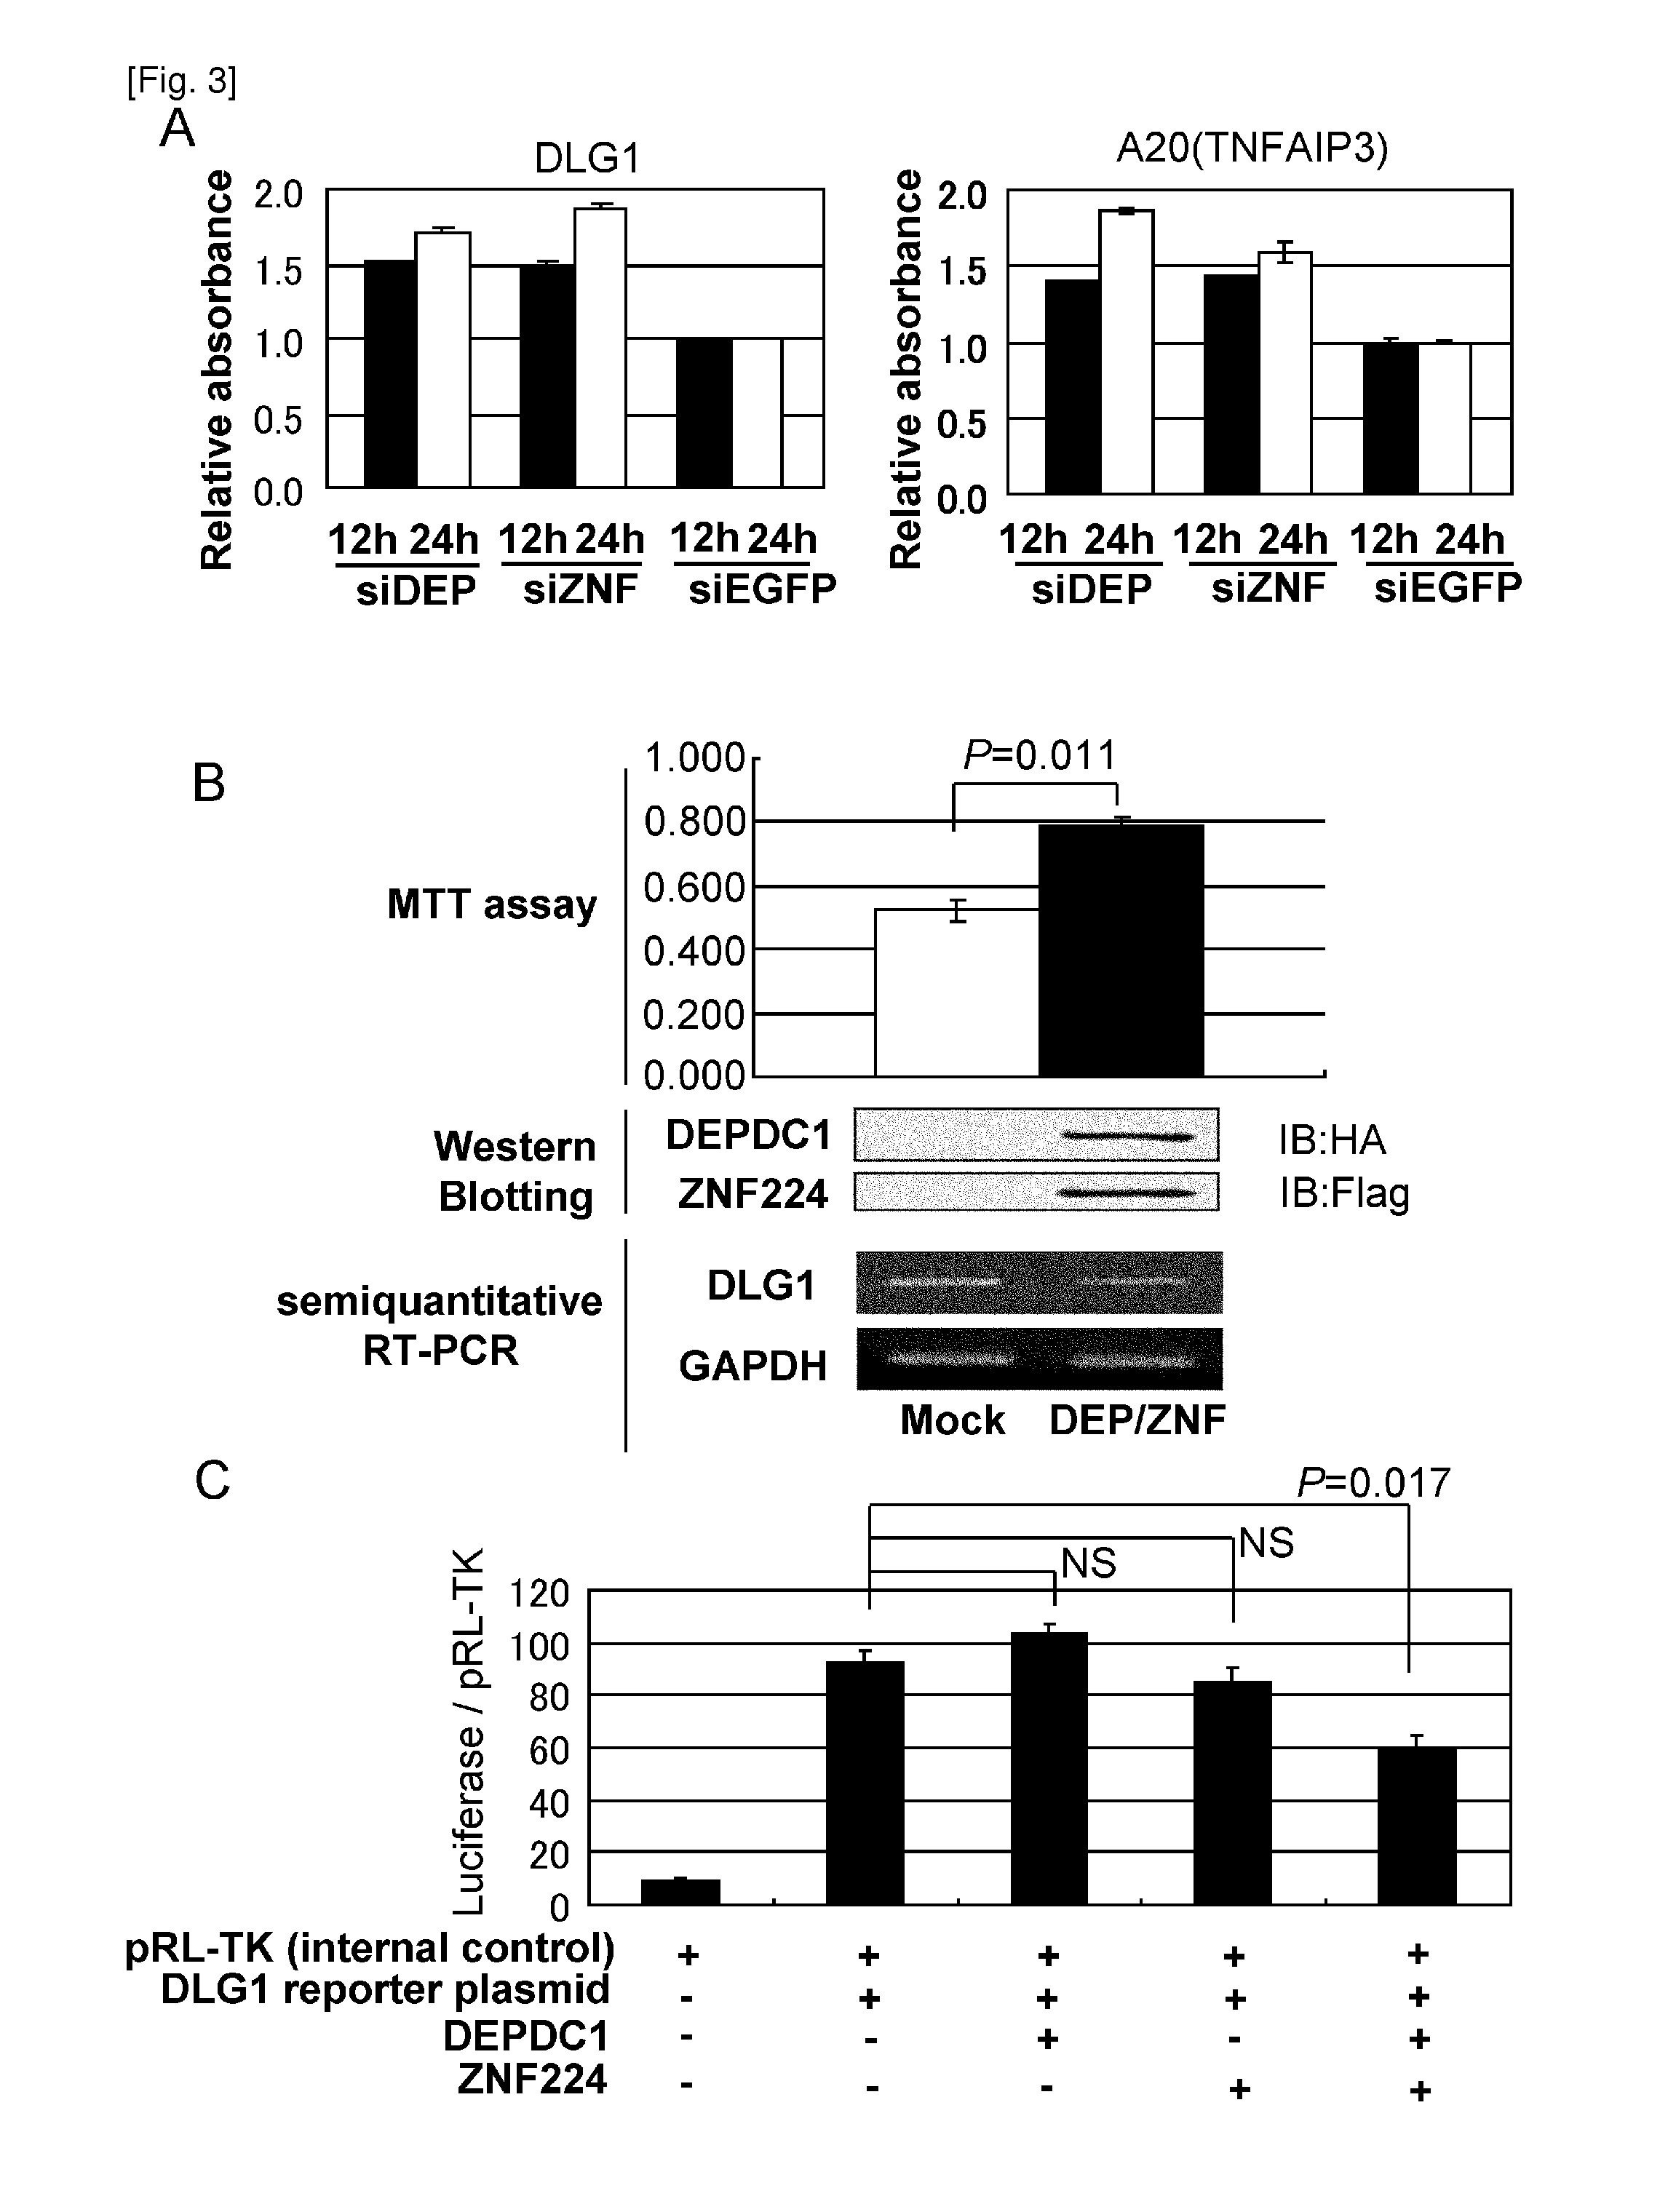 Method for treating or preventing bladder cancer using the depdc1 polypeptide